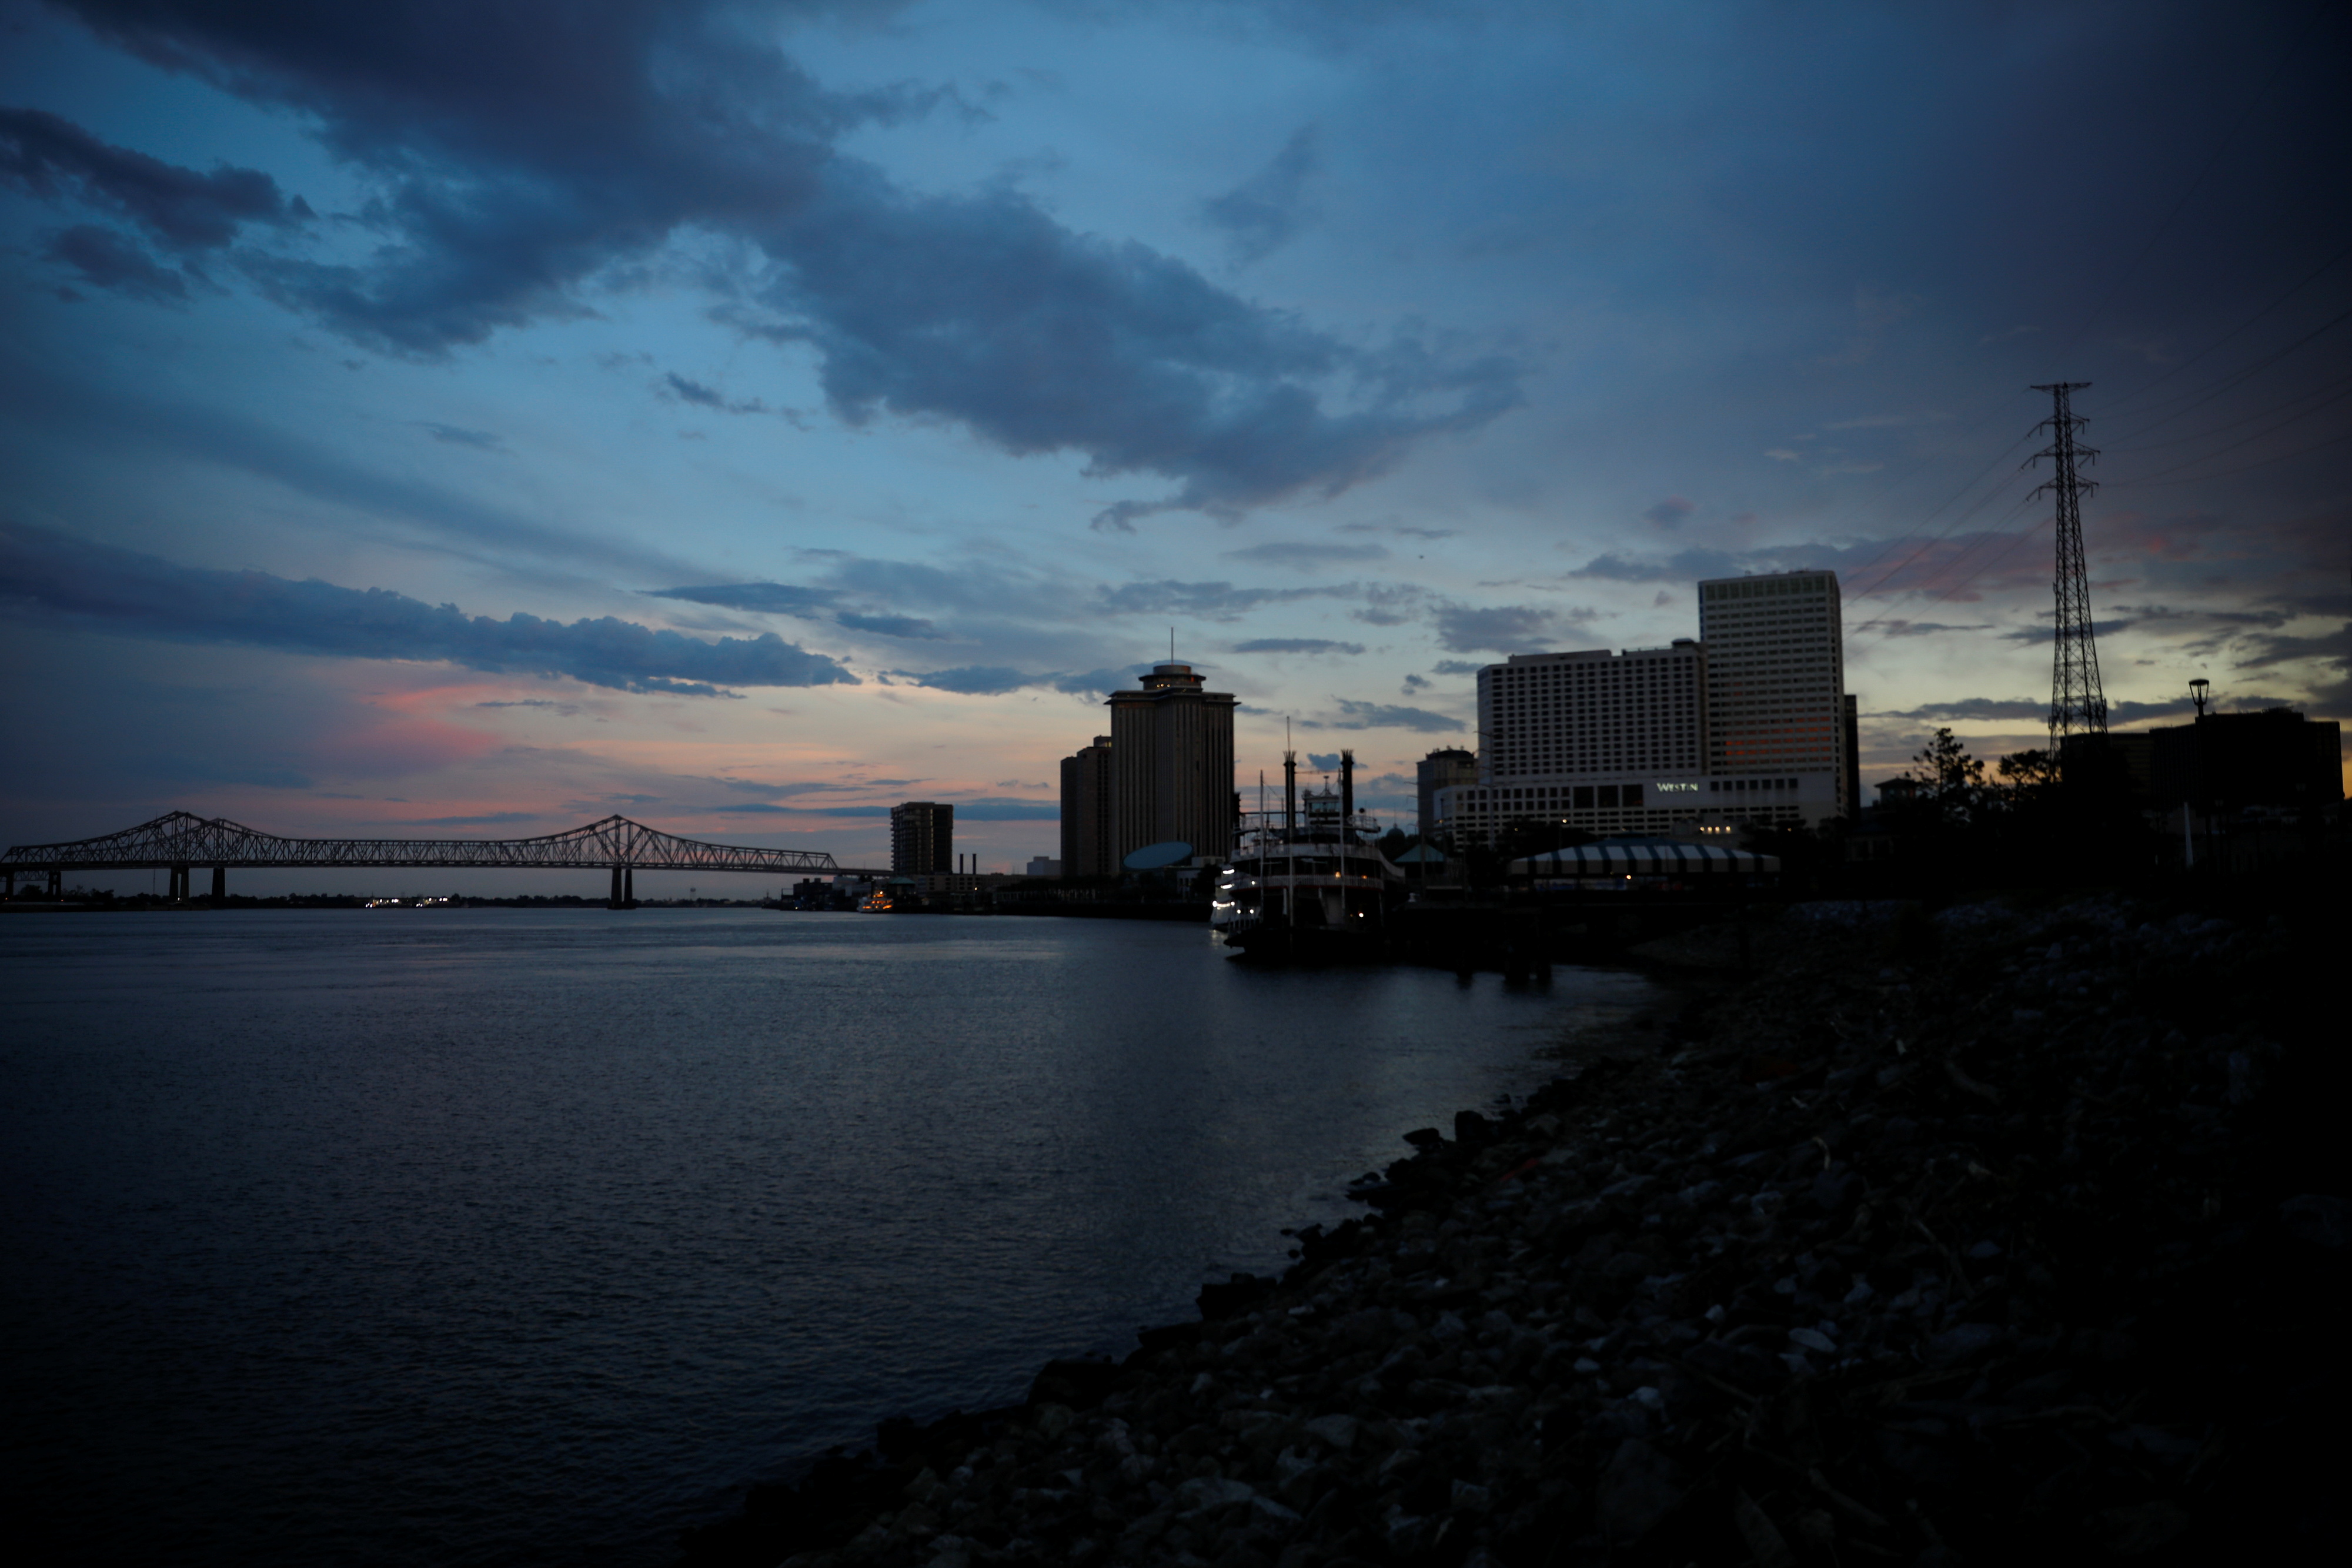 A view of Mississippi River at sunset during a blackout in the city after Hurricane Ida made landfall in Louisiana, in New Orleans, Louisiana, U.S. August 31, 2021. REUTERS/Marco Bello